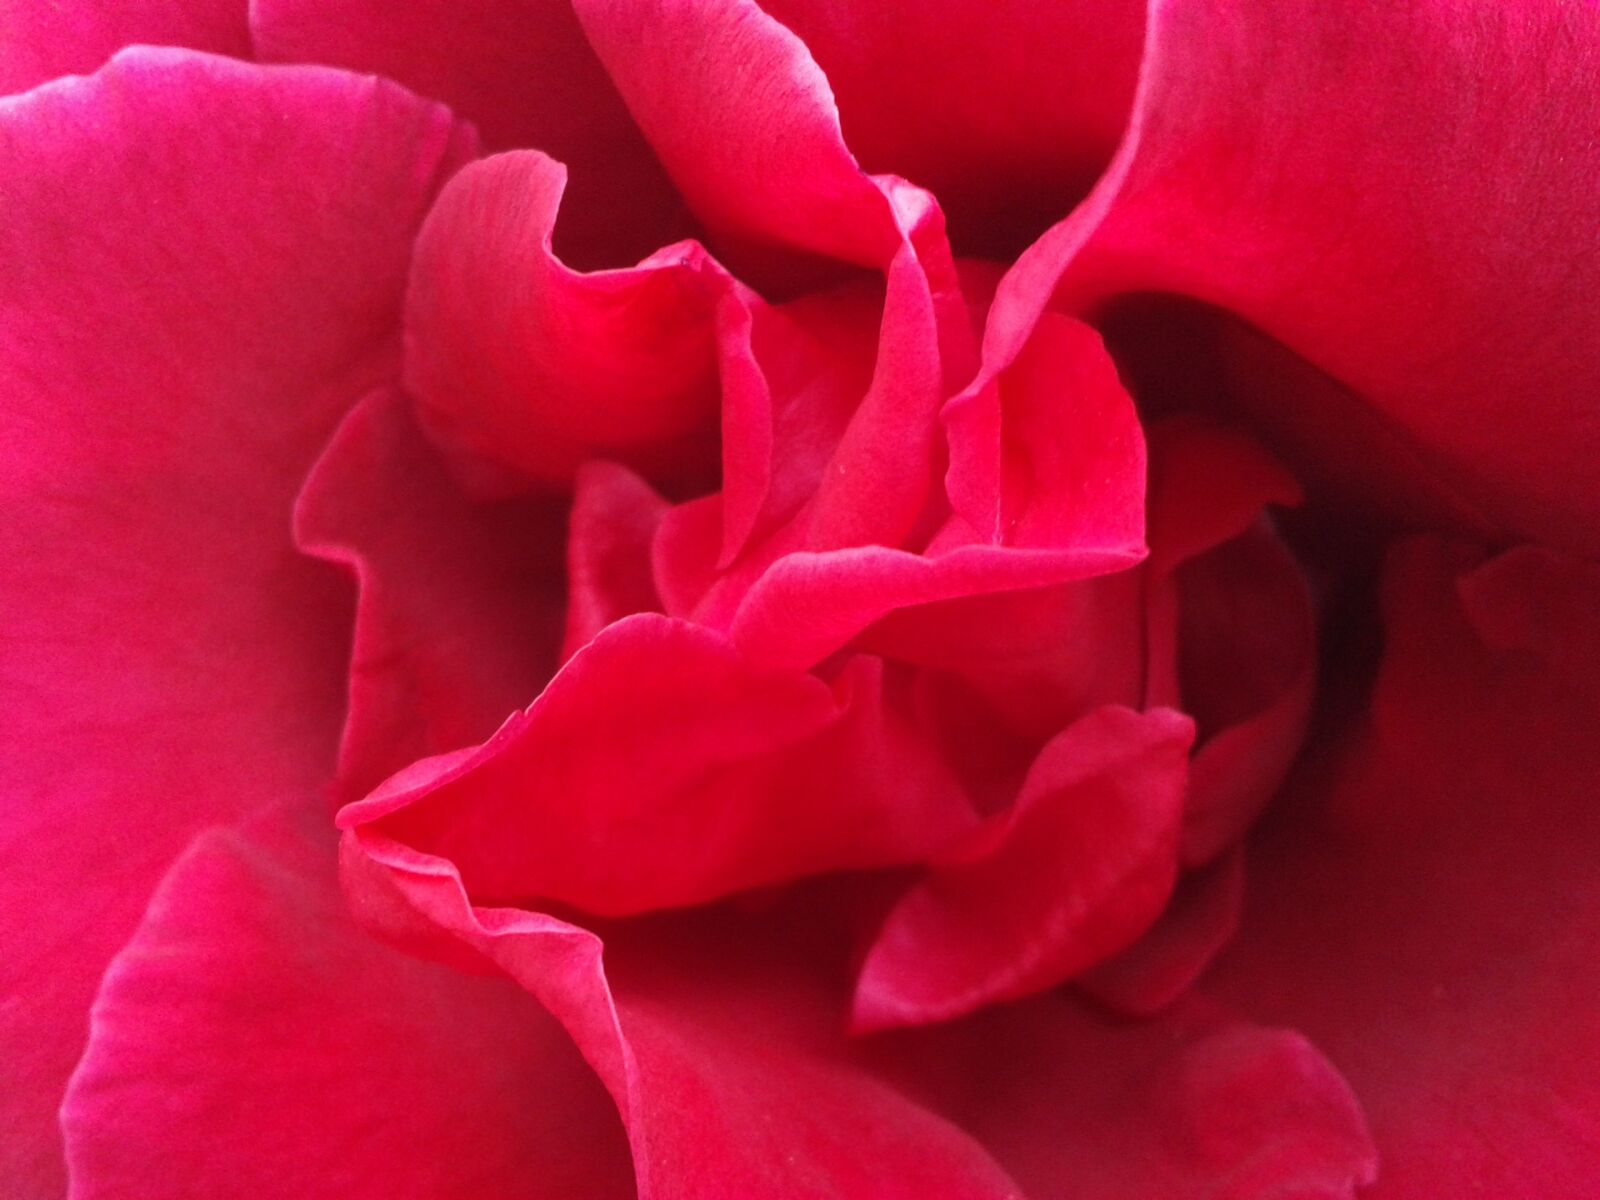 Samsung Galaxy S3 Mini sample photo. Rosa, red rose, flower photography